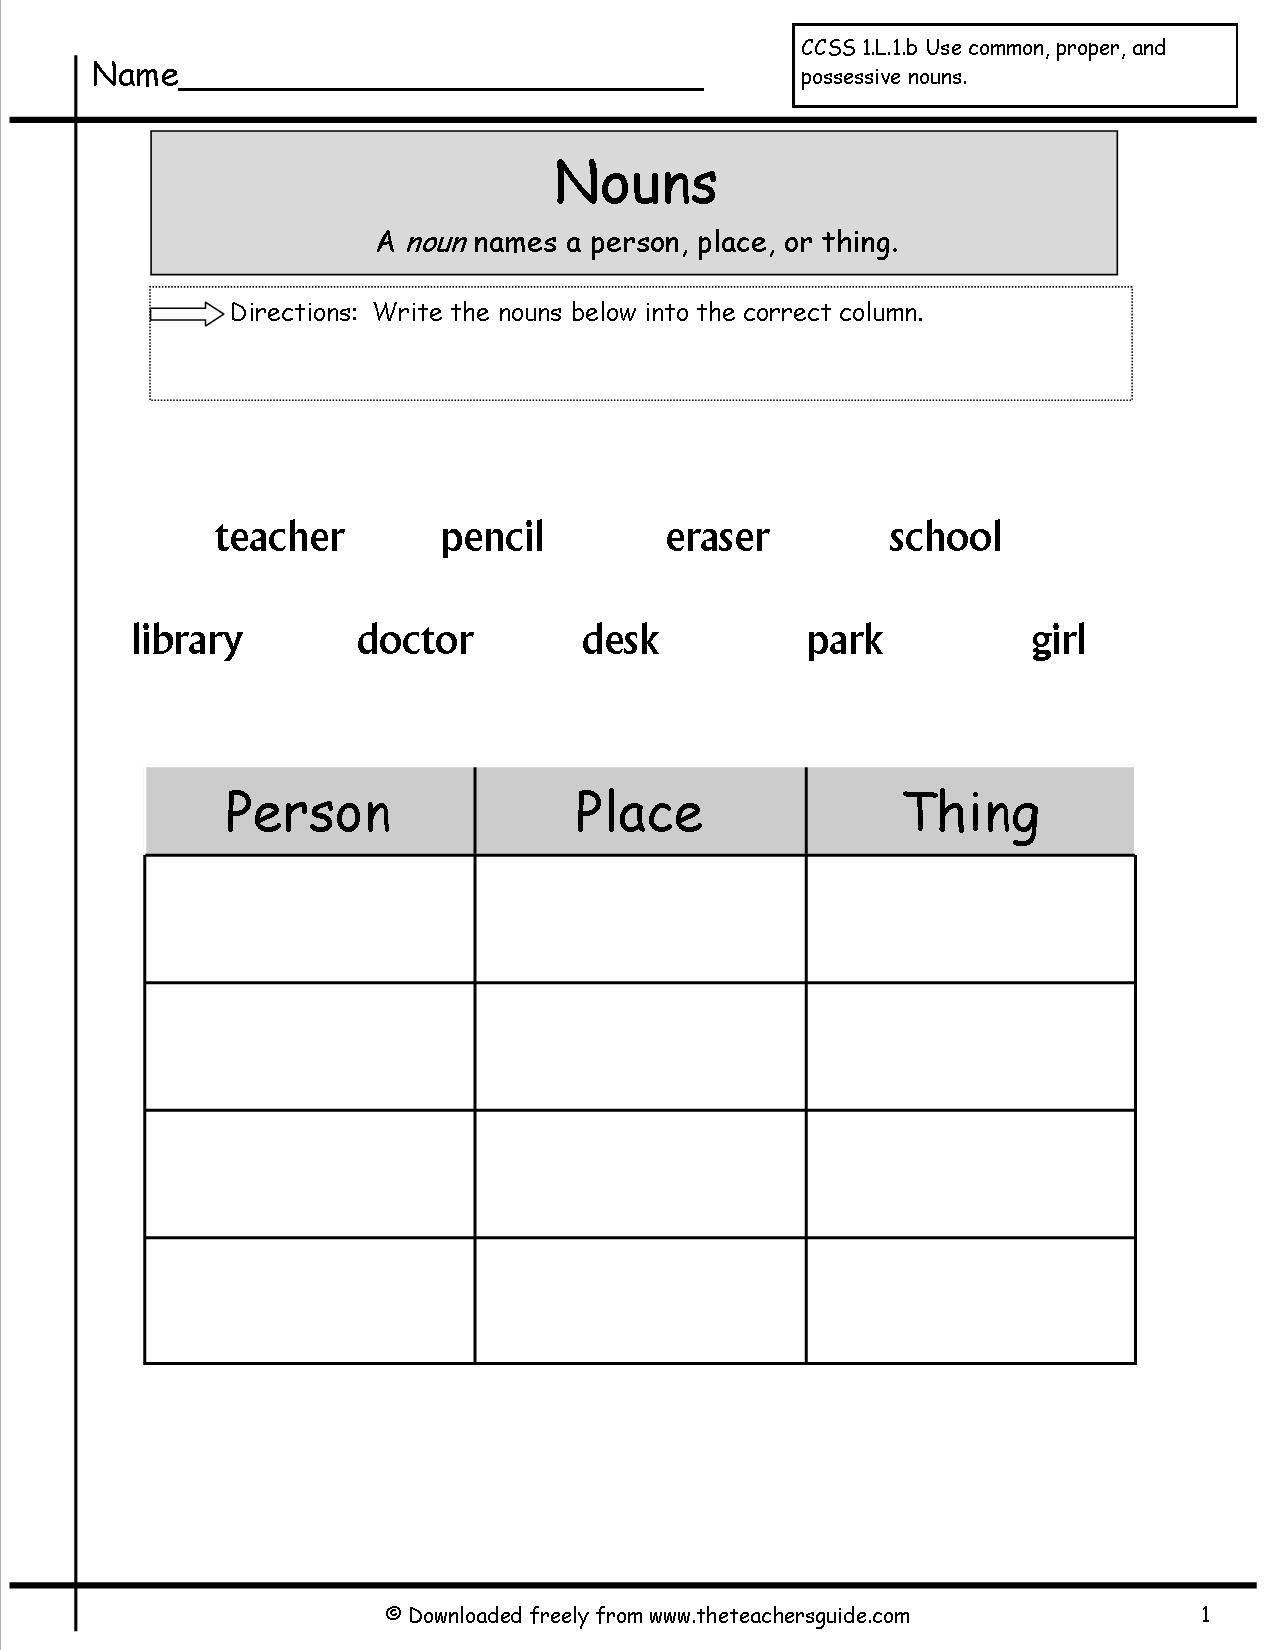 14-best-images-of-pronouns-worksheets-grade-3-spanish-pronouns-worksheet-conjunctions